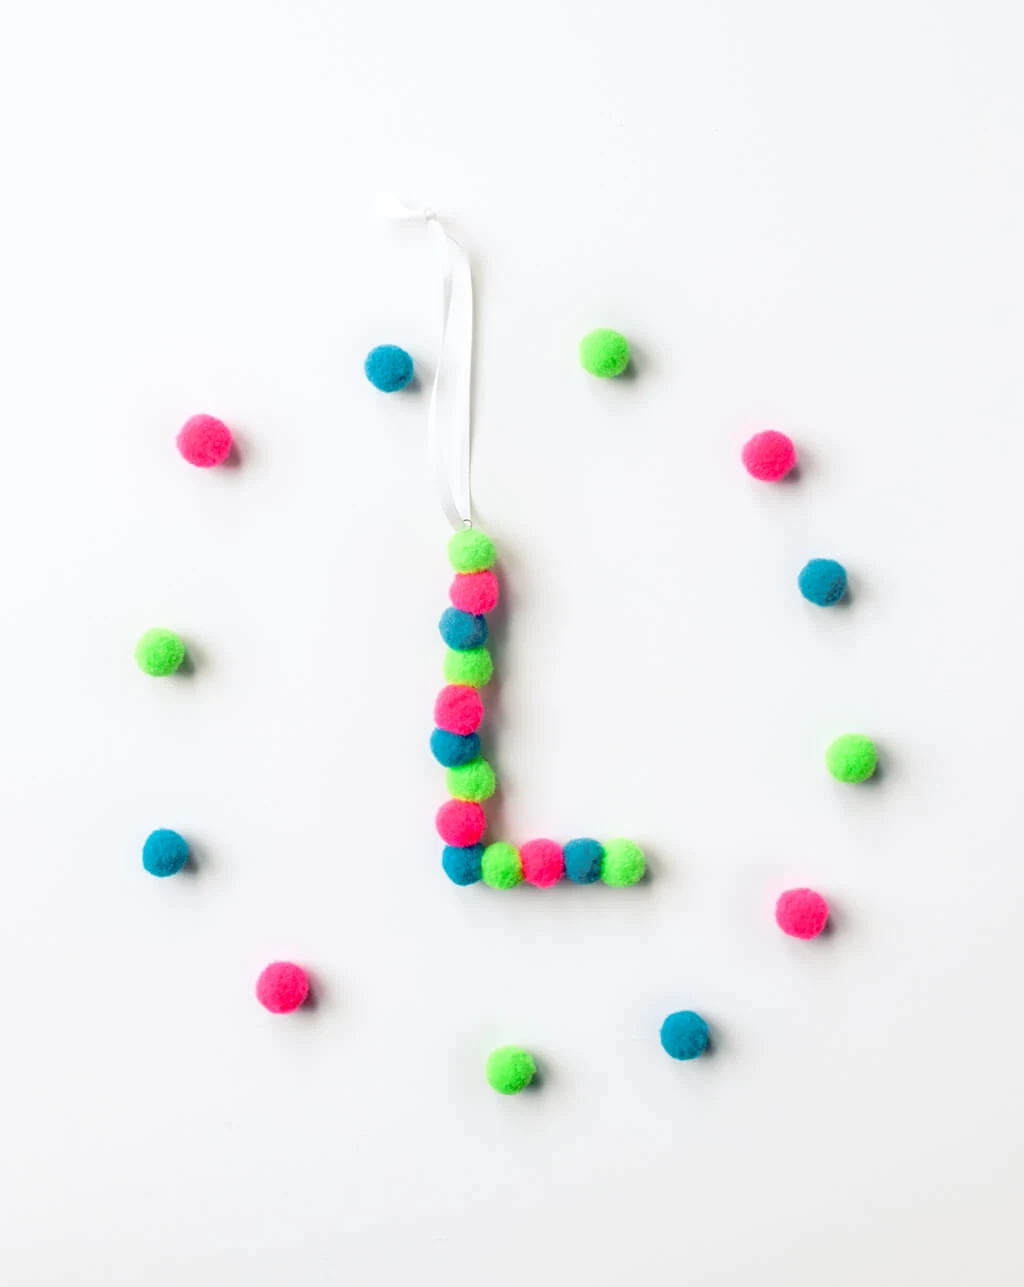 Letter L Christmas tree ornament made from mini pom poms